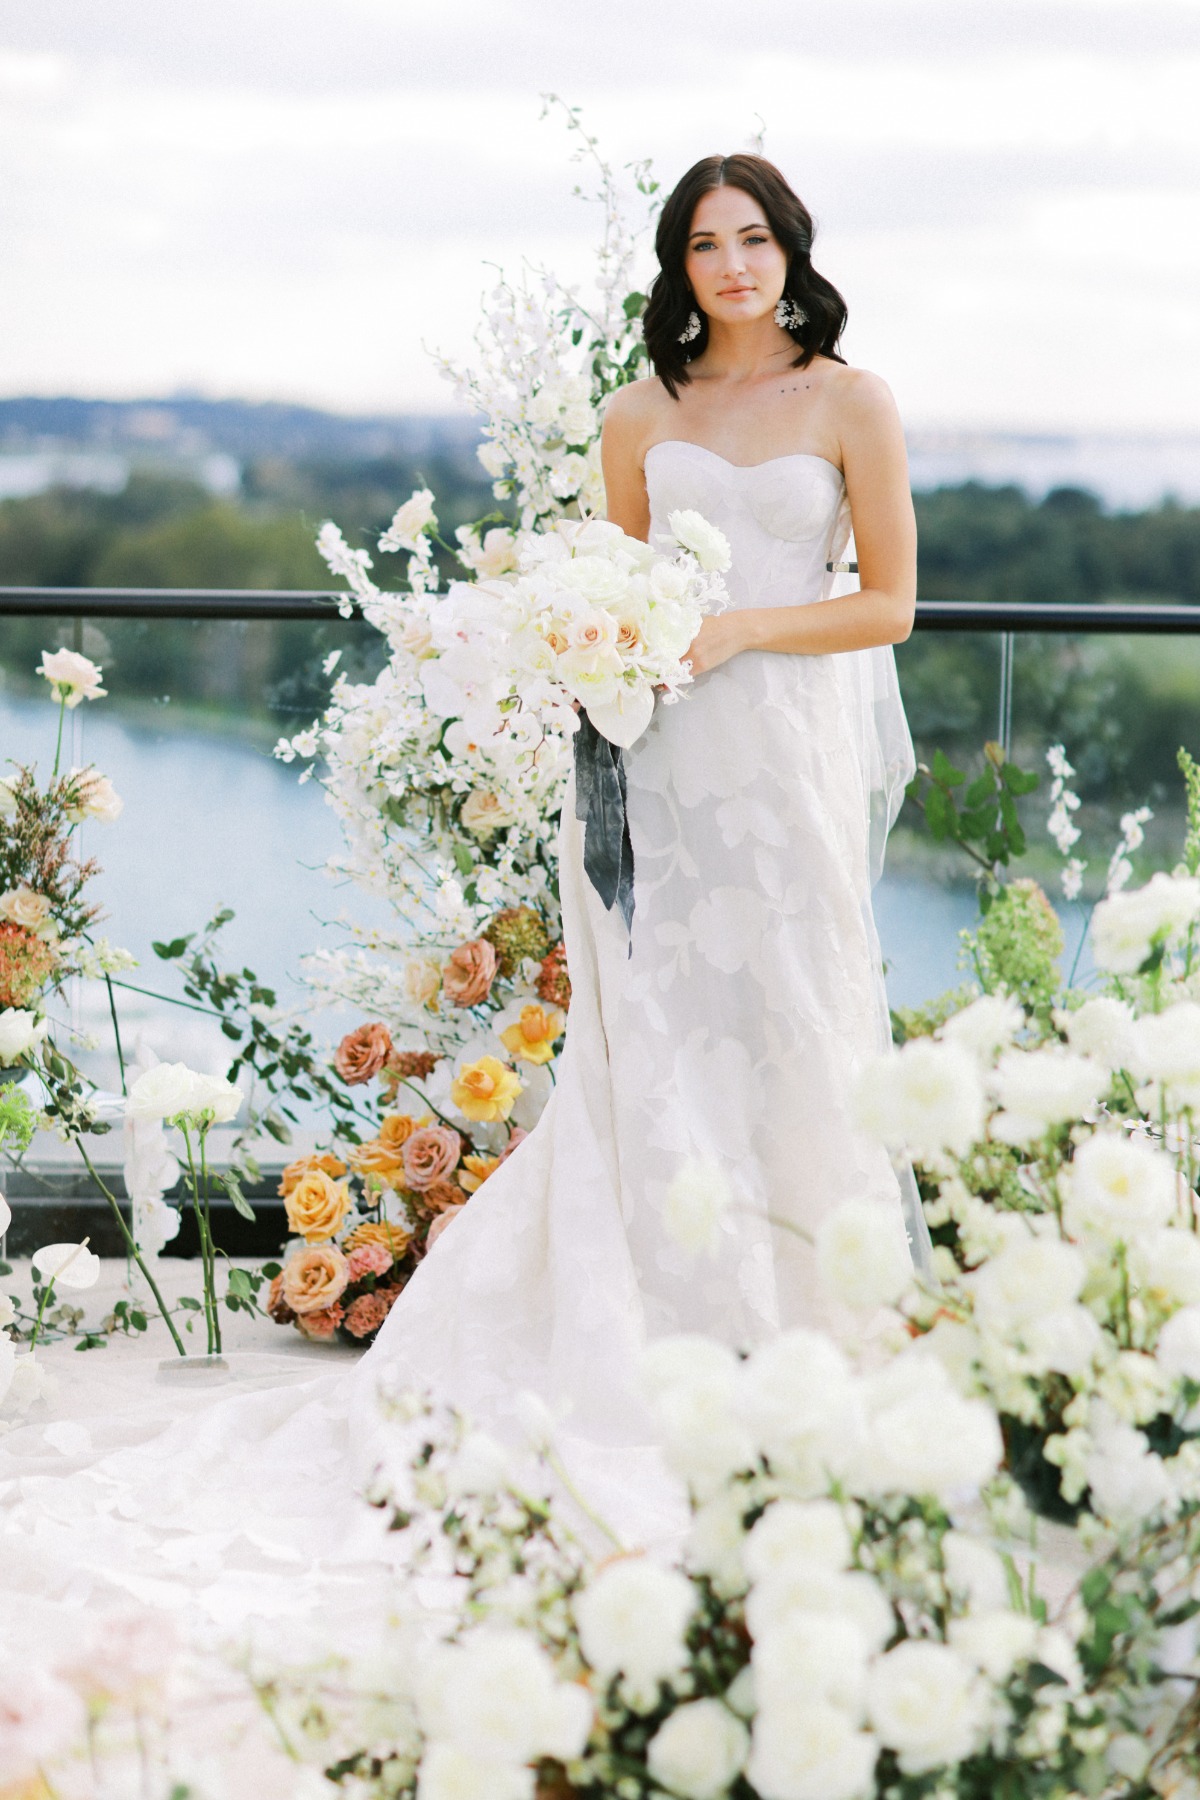 Edgy Inspirational Shoot With Whimsy Florals and Badass Details in Washington DC